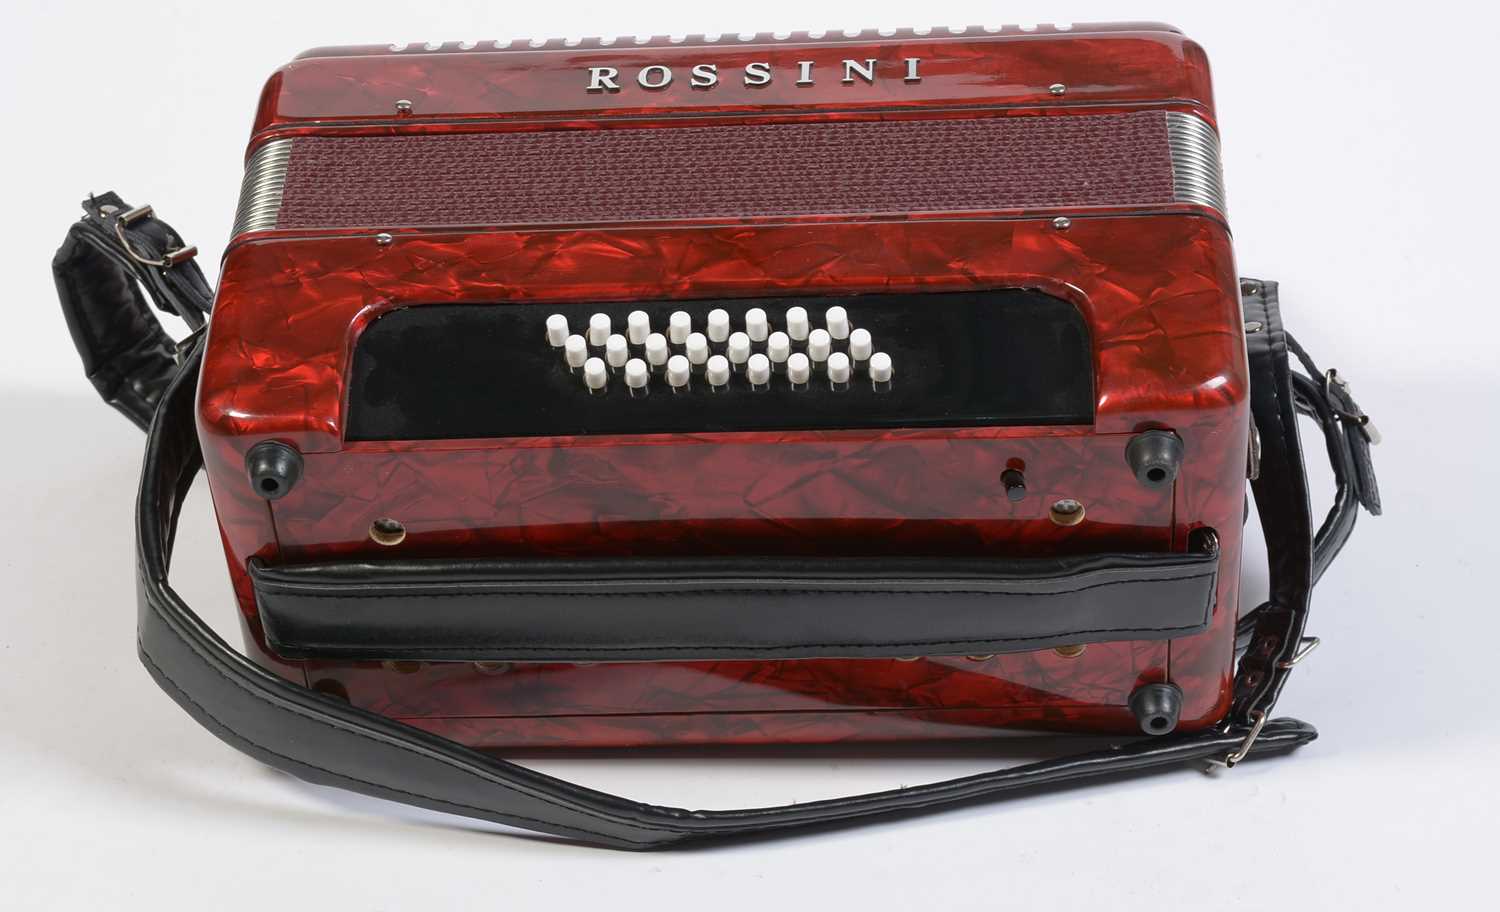 A Rossini 24 bass accordion - Image 5 of 9